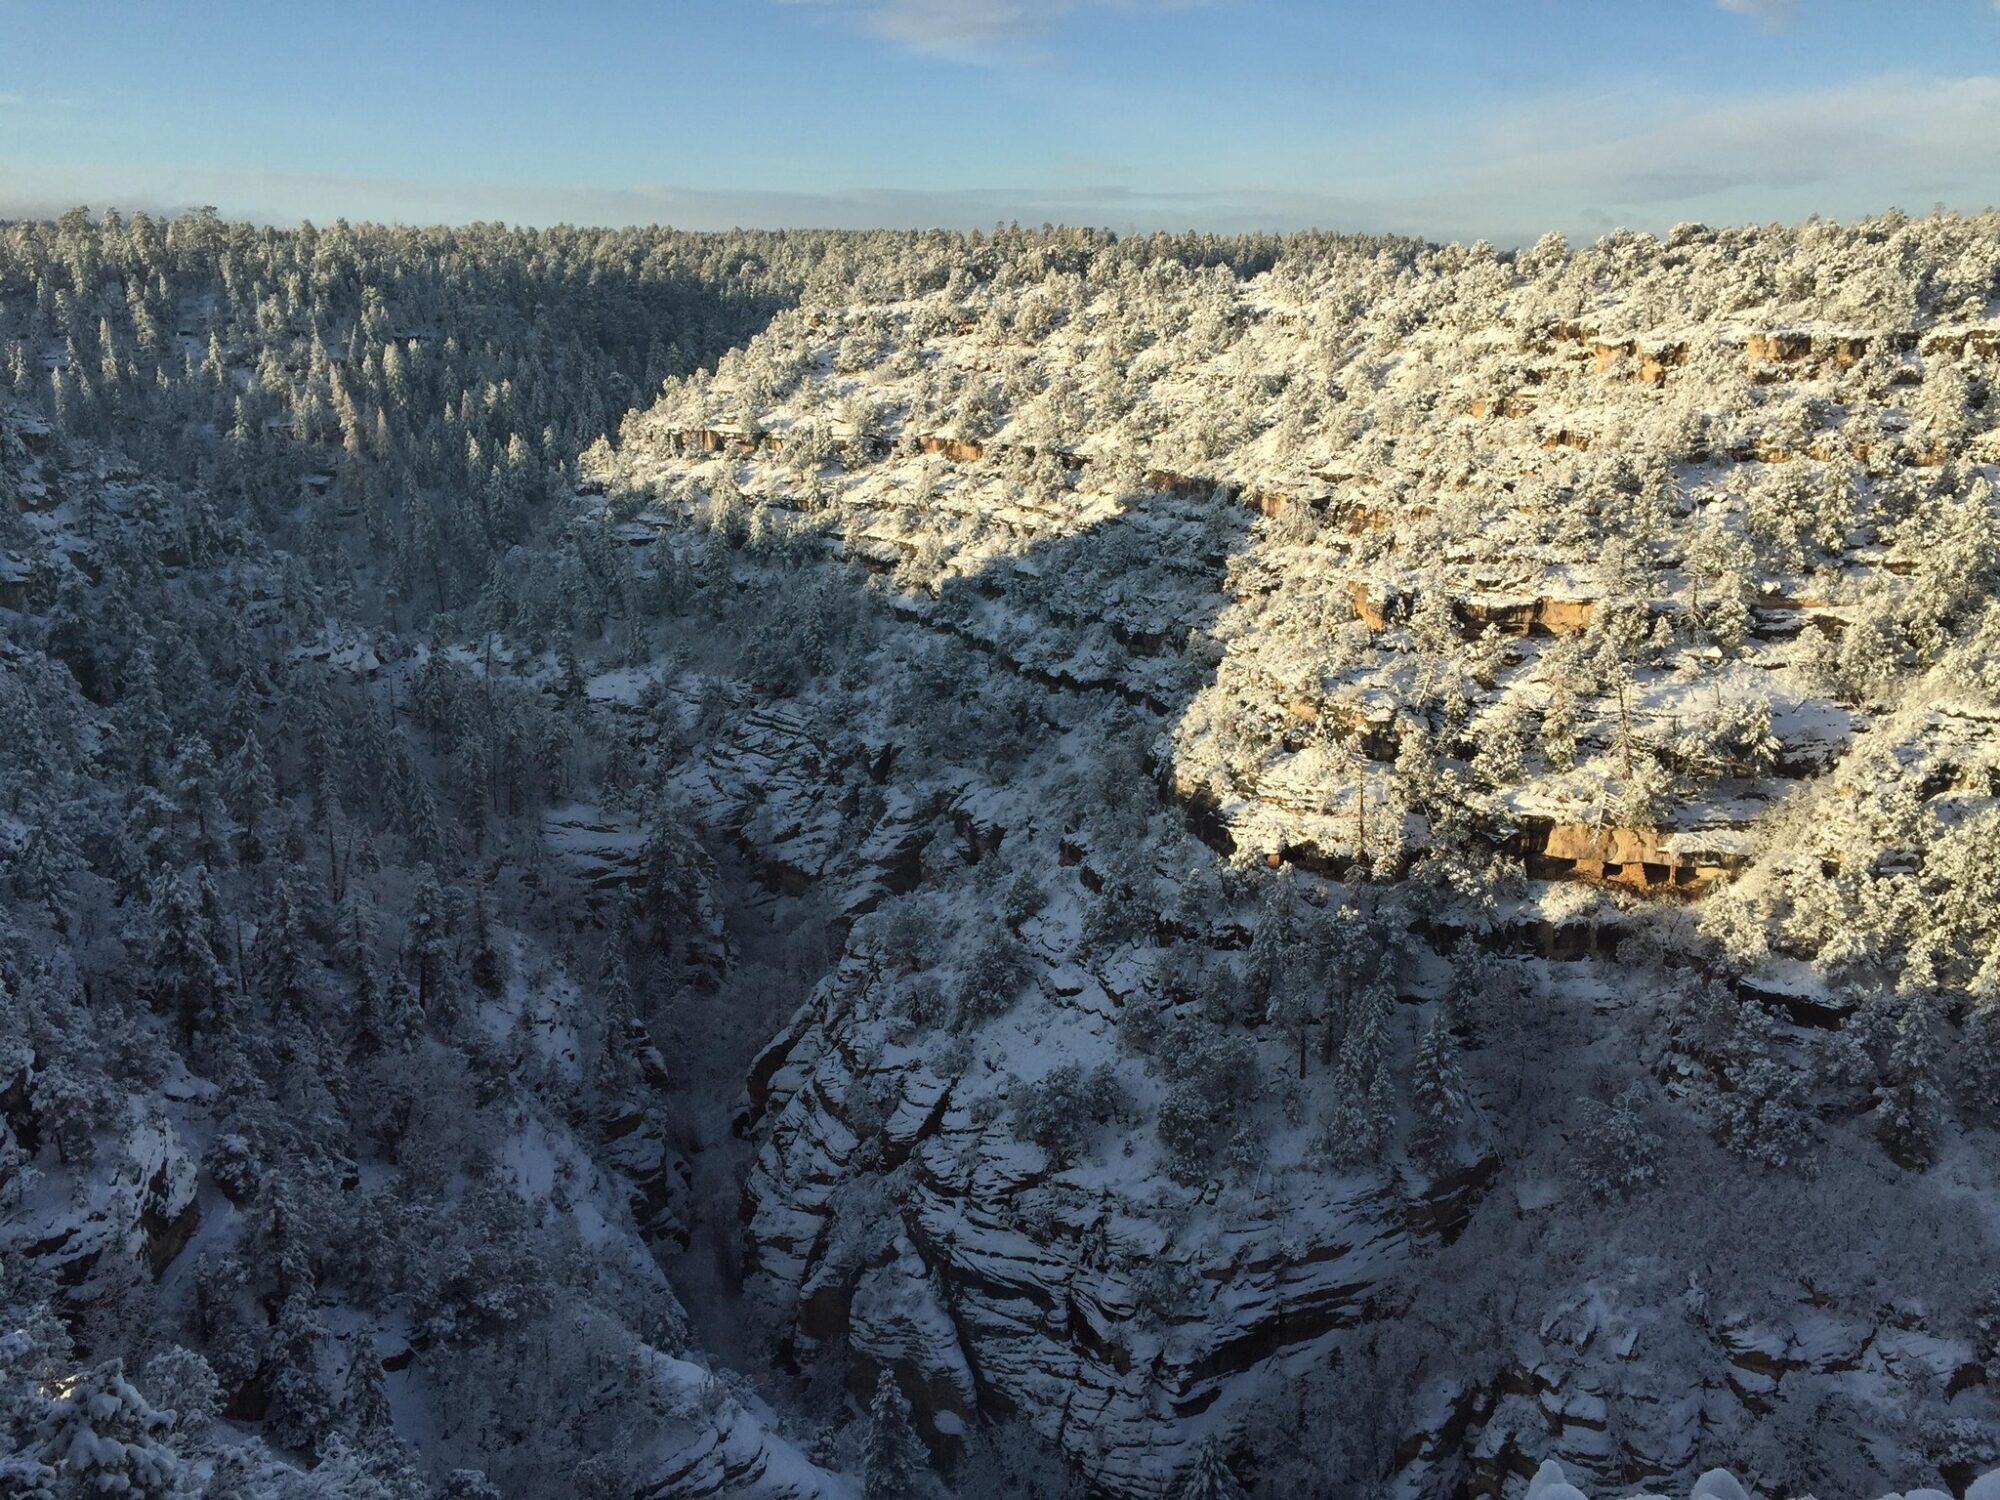 Walnut Canyon National Monument at sunset and covered in light snow.